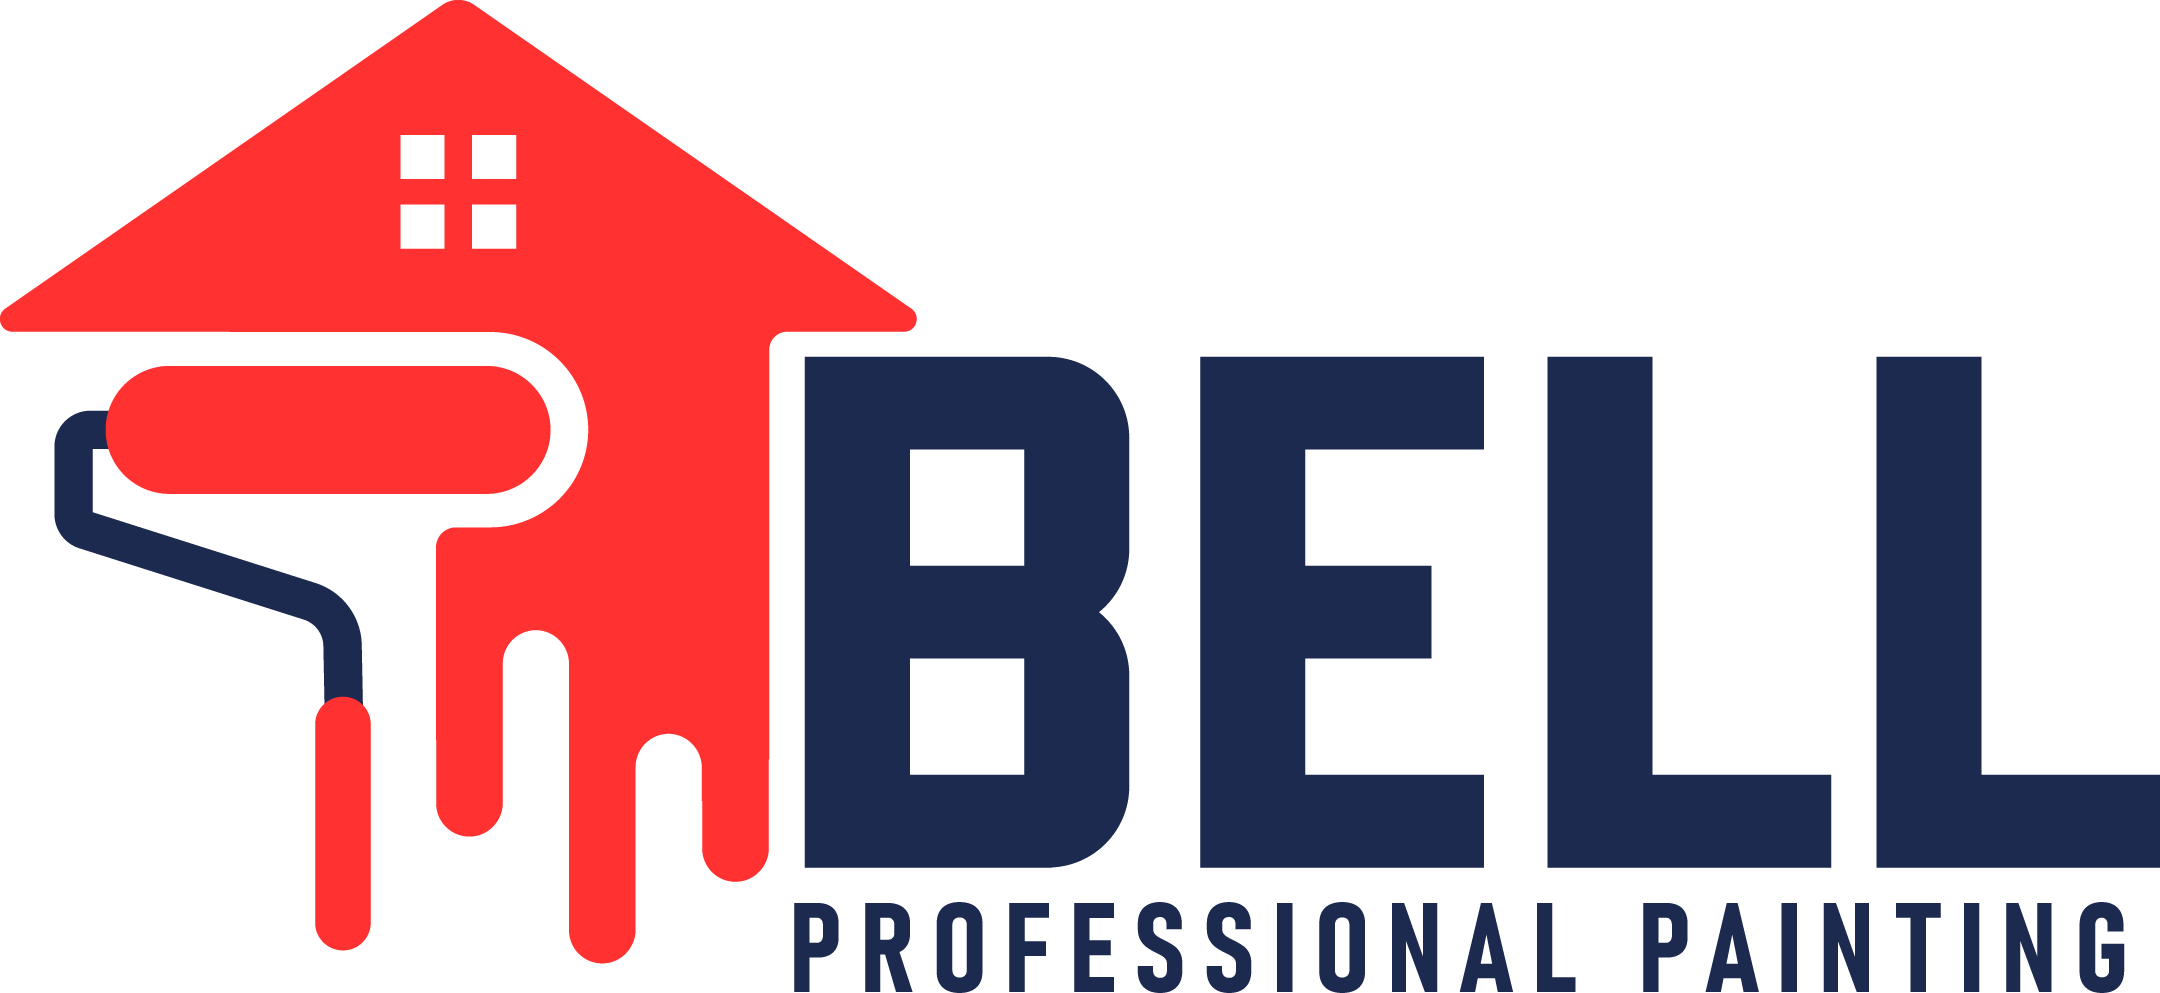 Bell Professional Painting, Inc. Logo